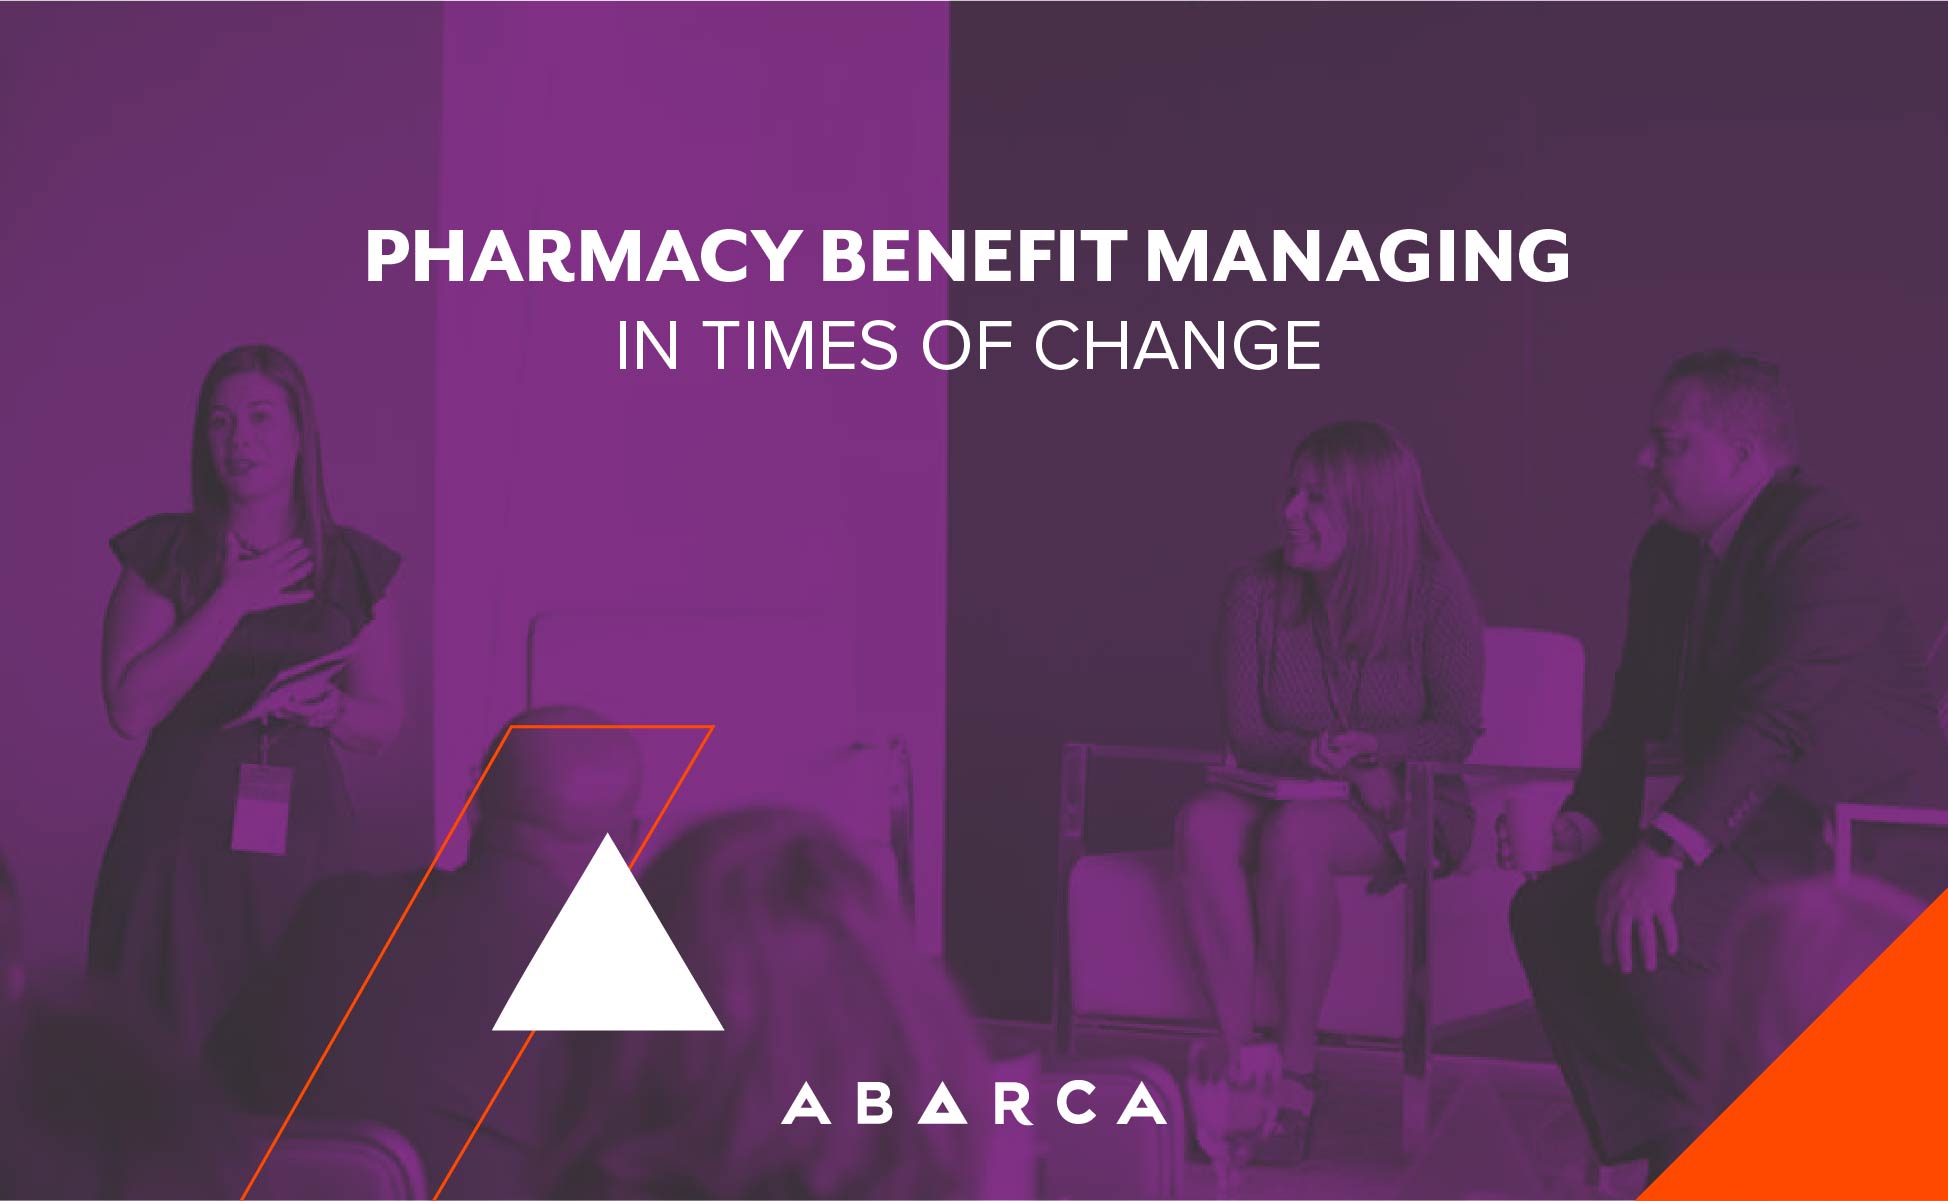 Abarca Health Brings Together Business Leaders to Exchange Ideas on Managing in Times of Change